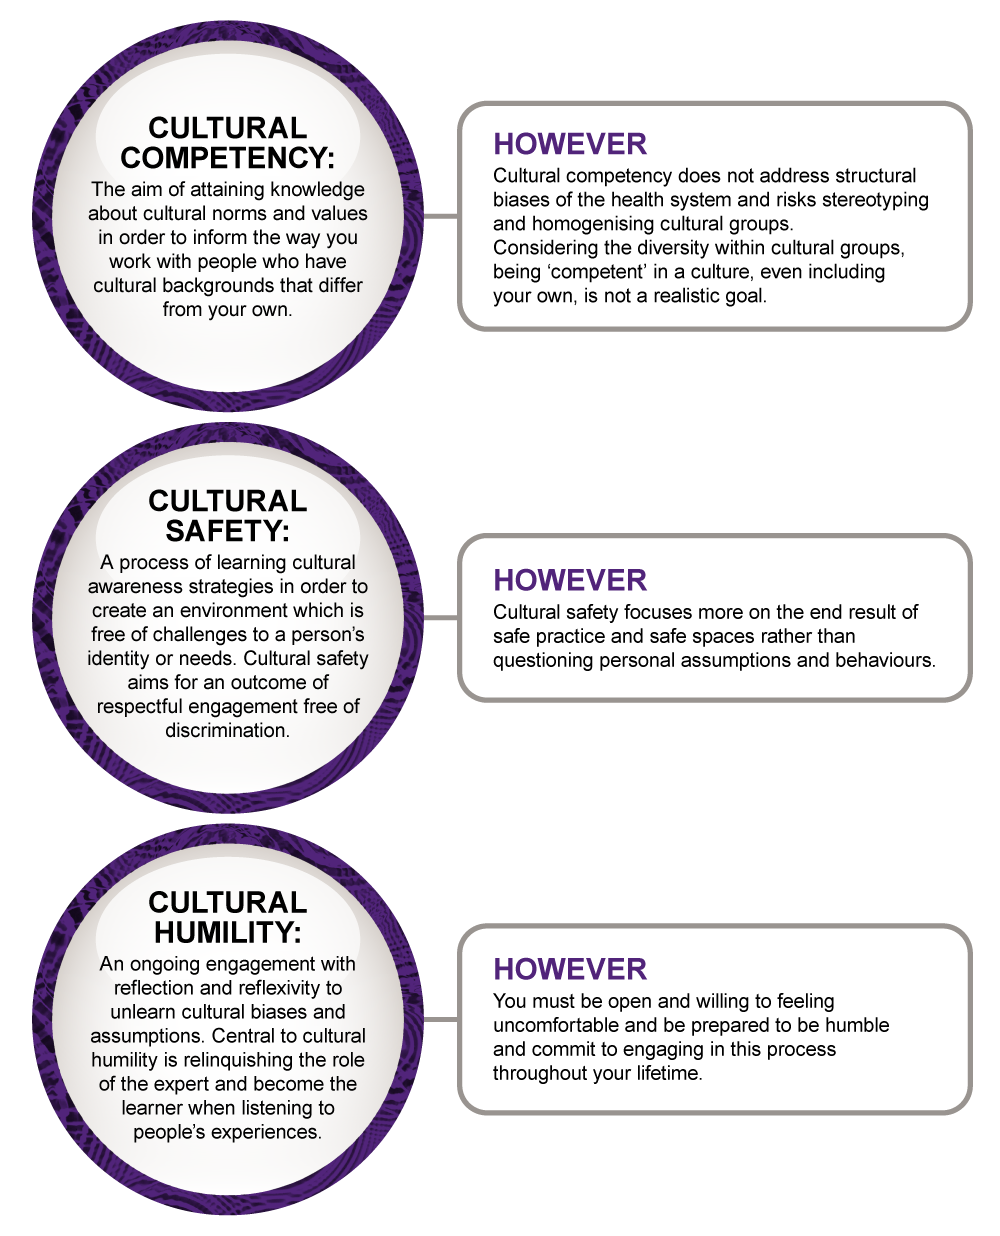 Cultural competency, safety and humility